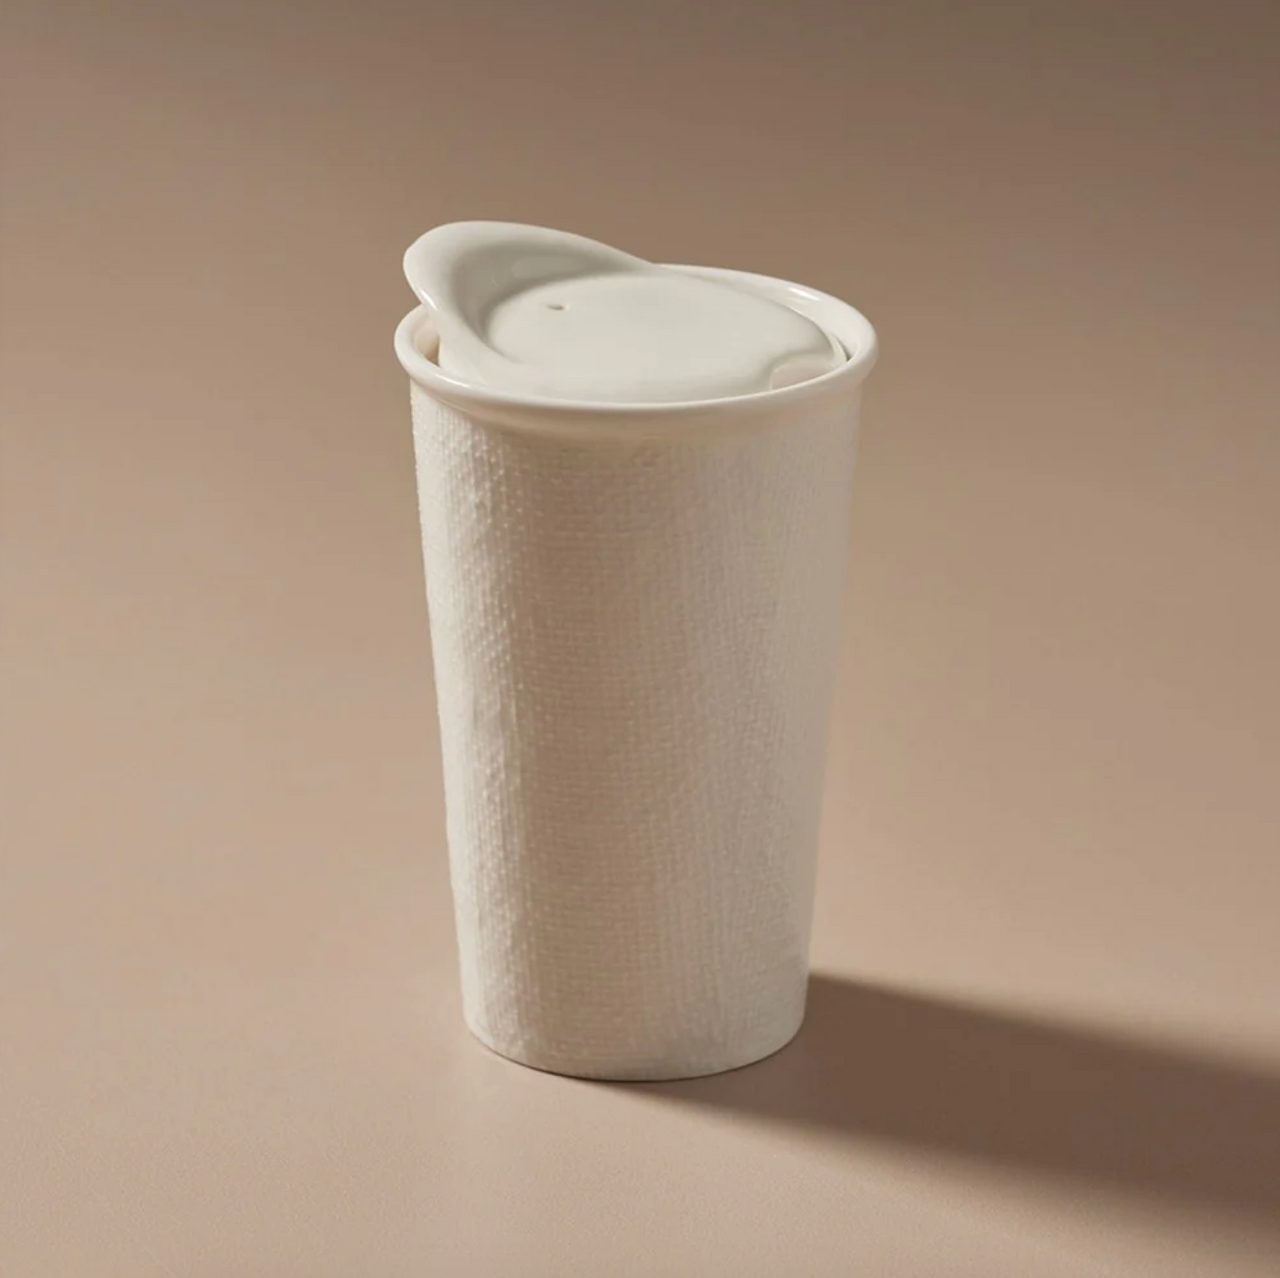 An Indigo Love Keeper Cup - Ceramic - White Linen with a sealable lid sitting on a table.